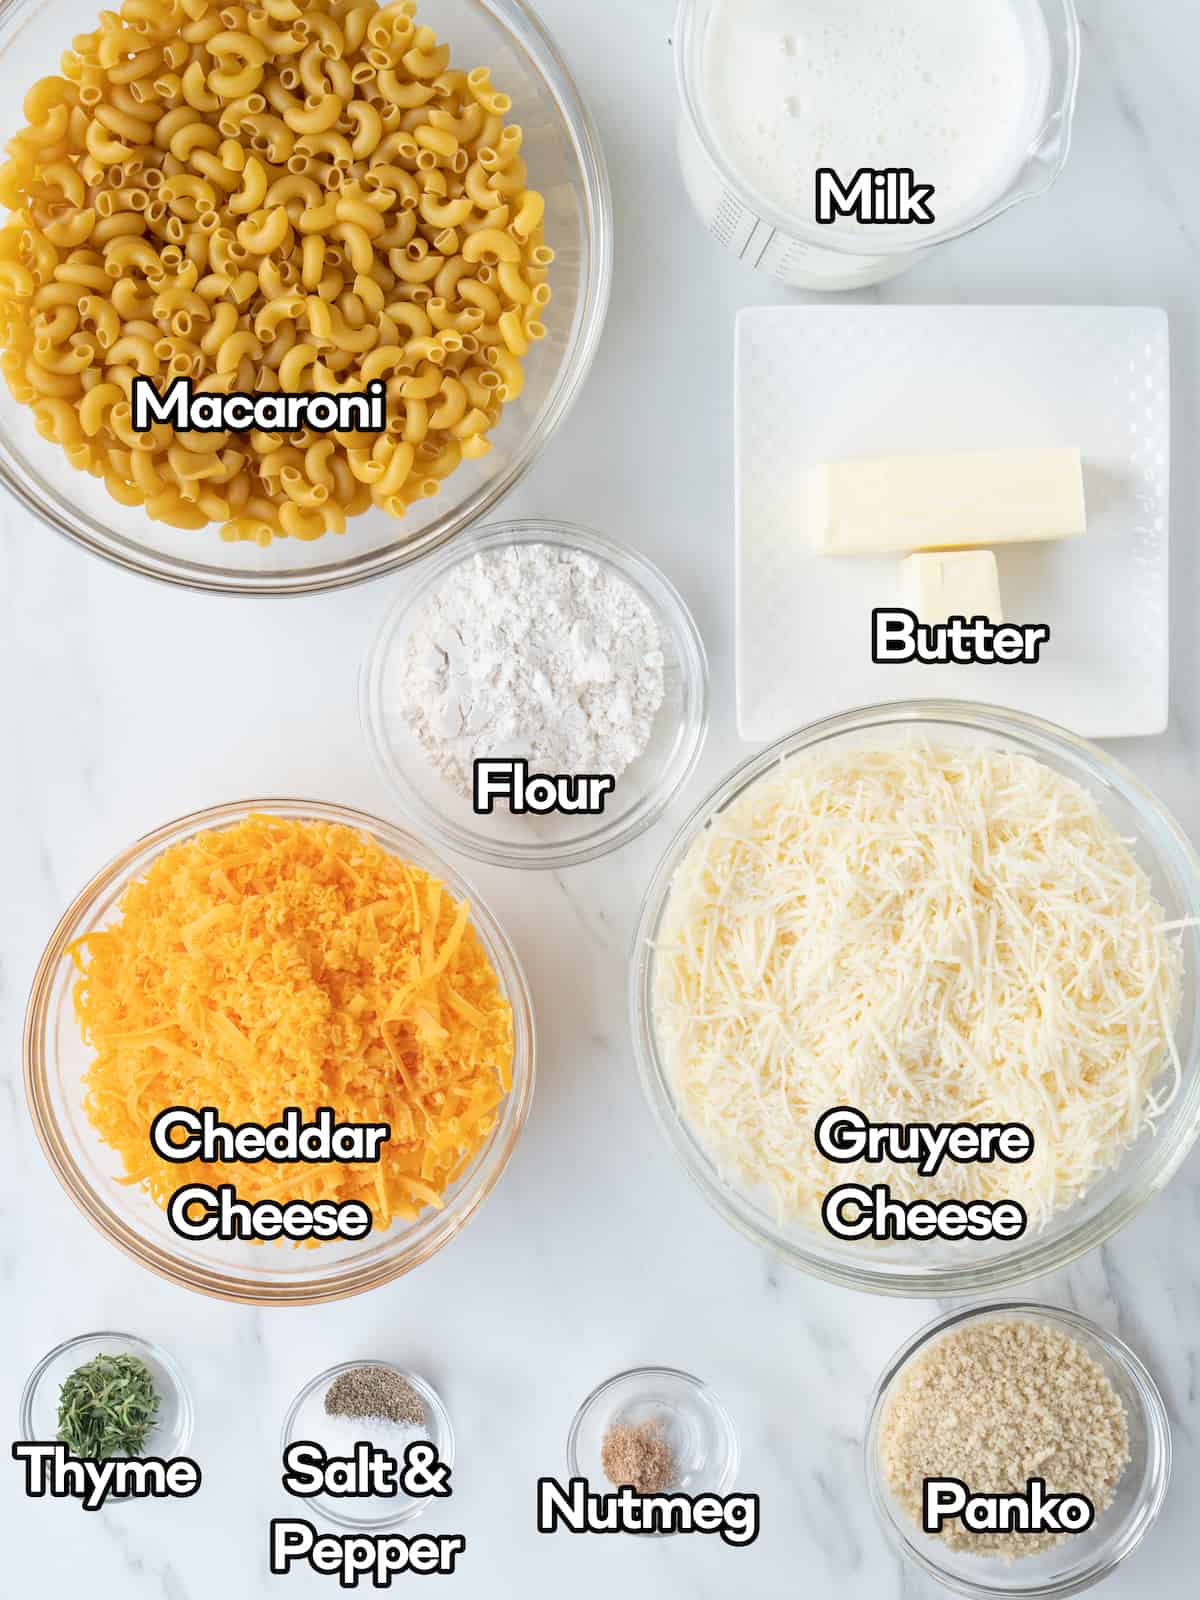 mise-en-place with all the ingredients required to make baked mac and cheese.